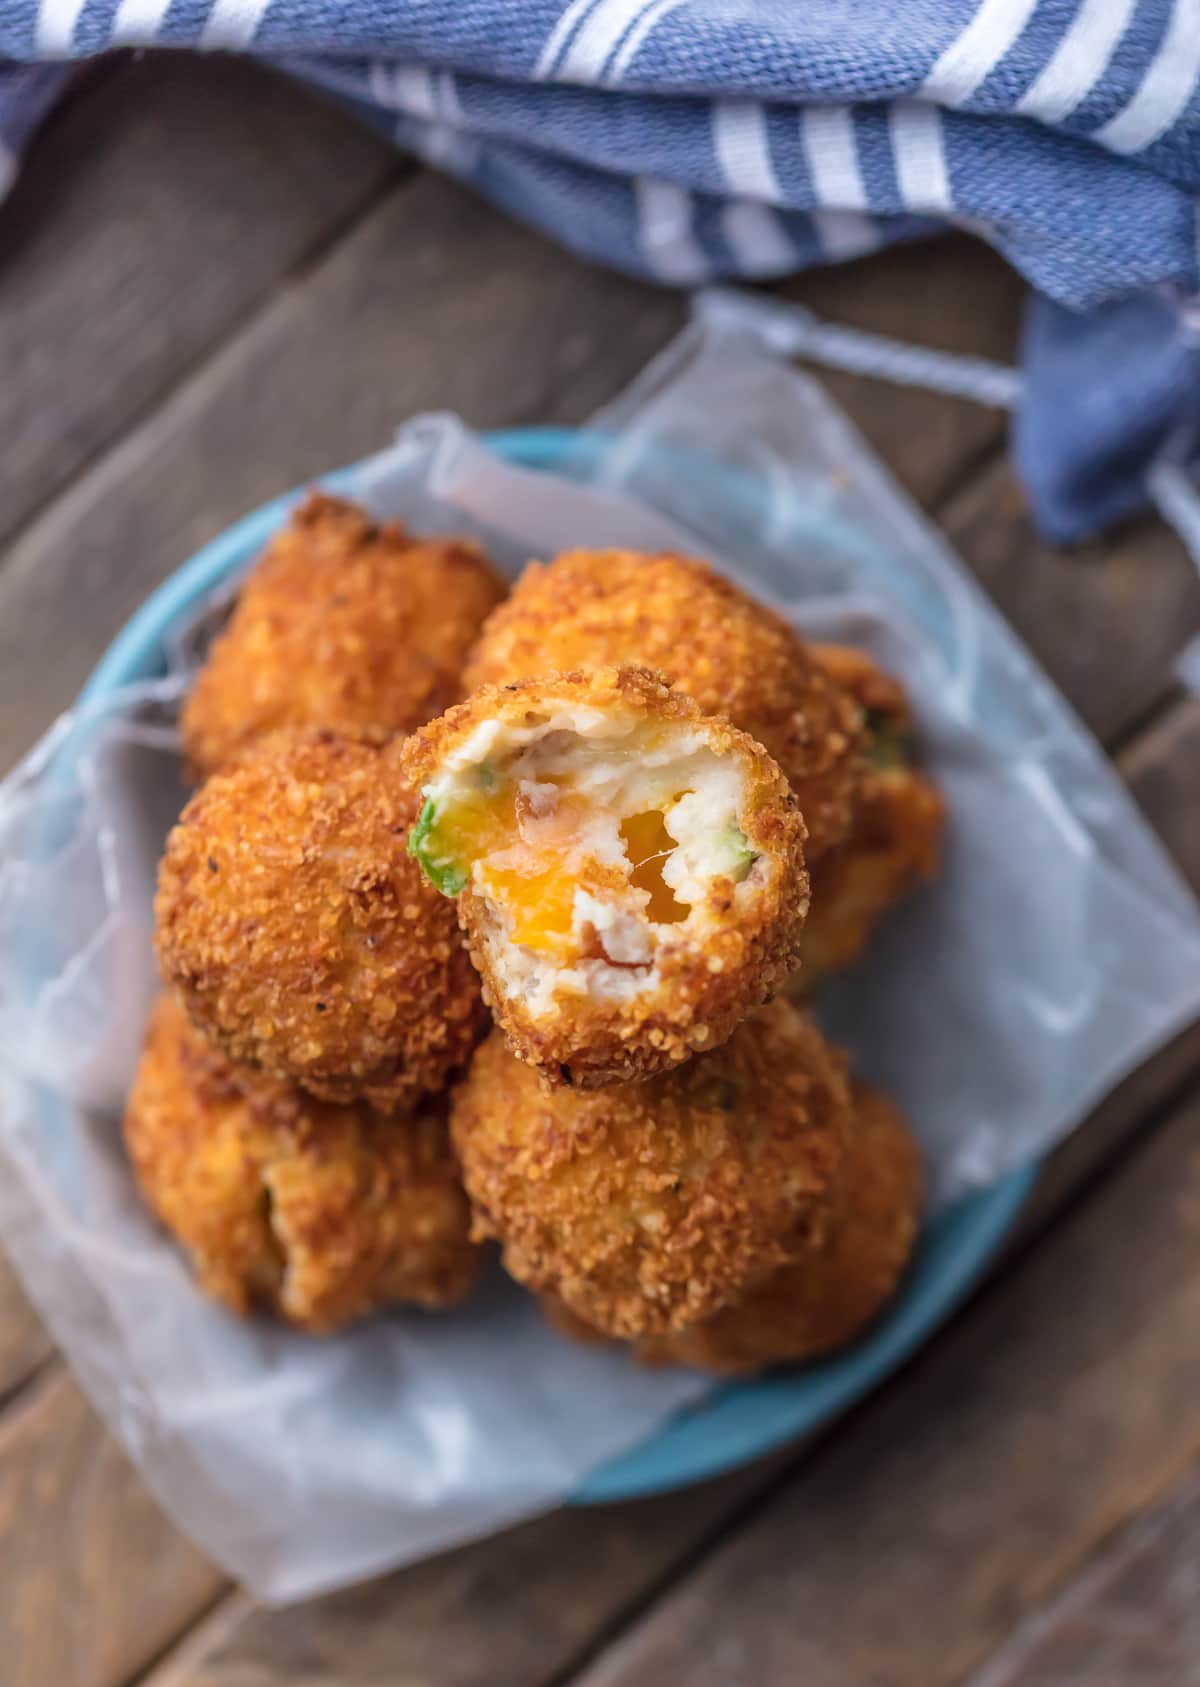 Fried Mashed Potato Balls filled with cheese and bacon